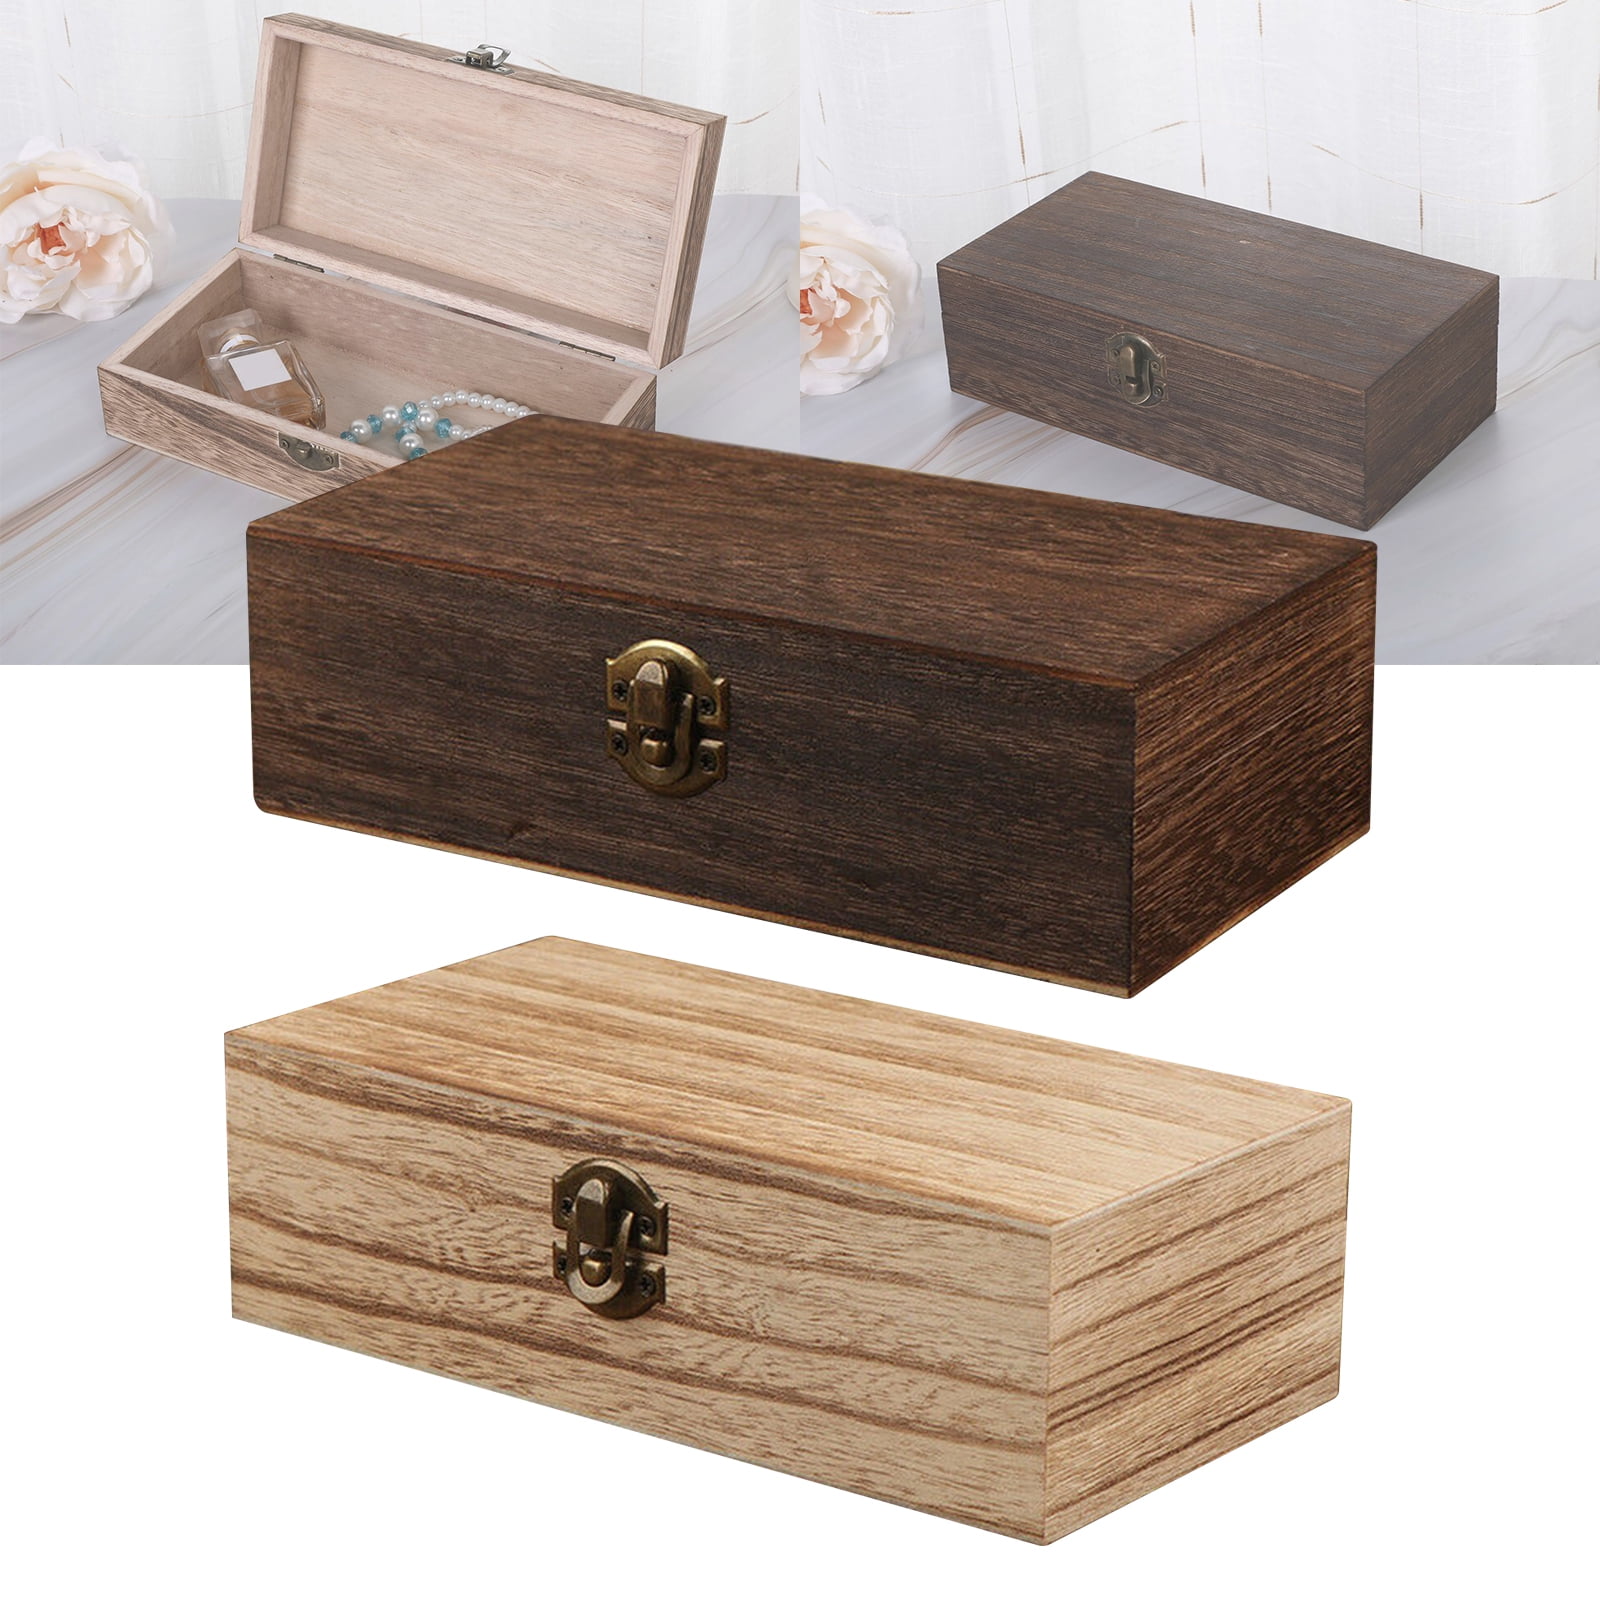 Floral Design Wooden Jewellery Box Make Up Mirror Vanity Craft Case 3 Sections 